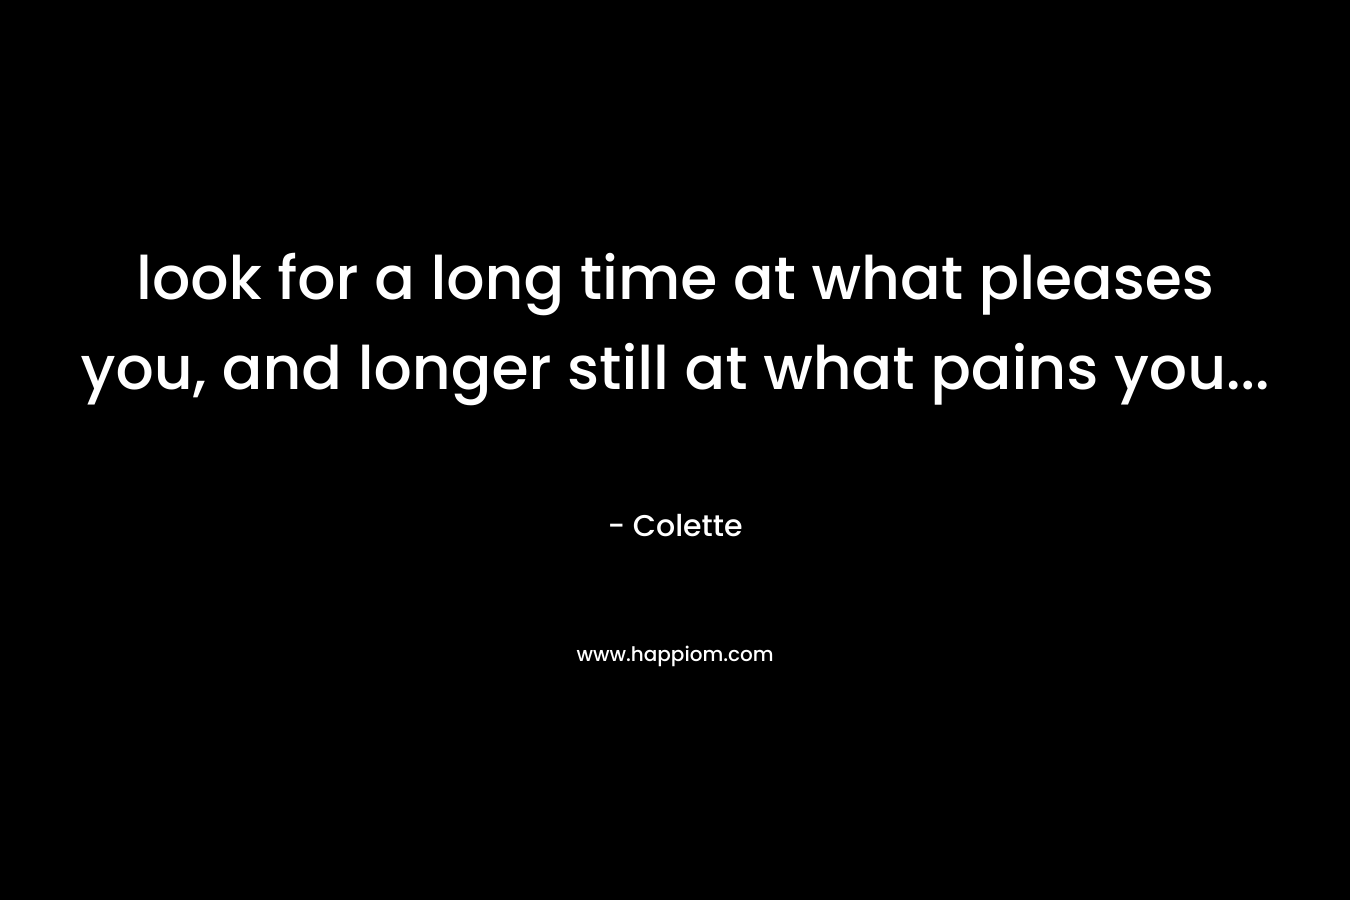 look for a long time at what pleases you, and longer still at what pains you...